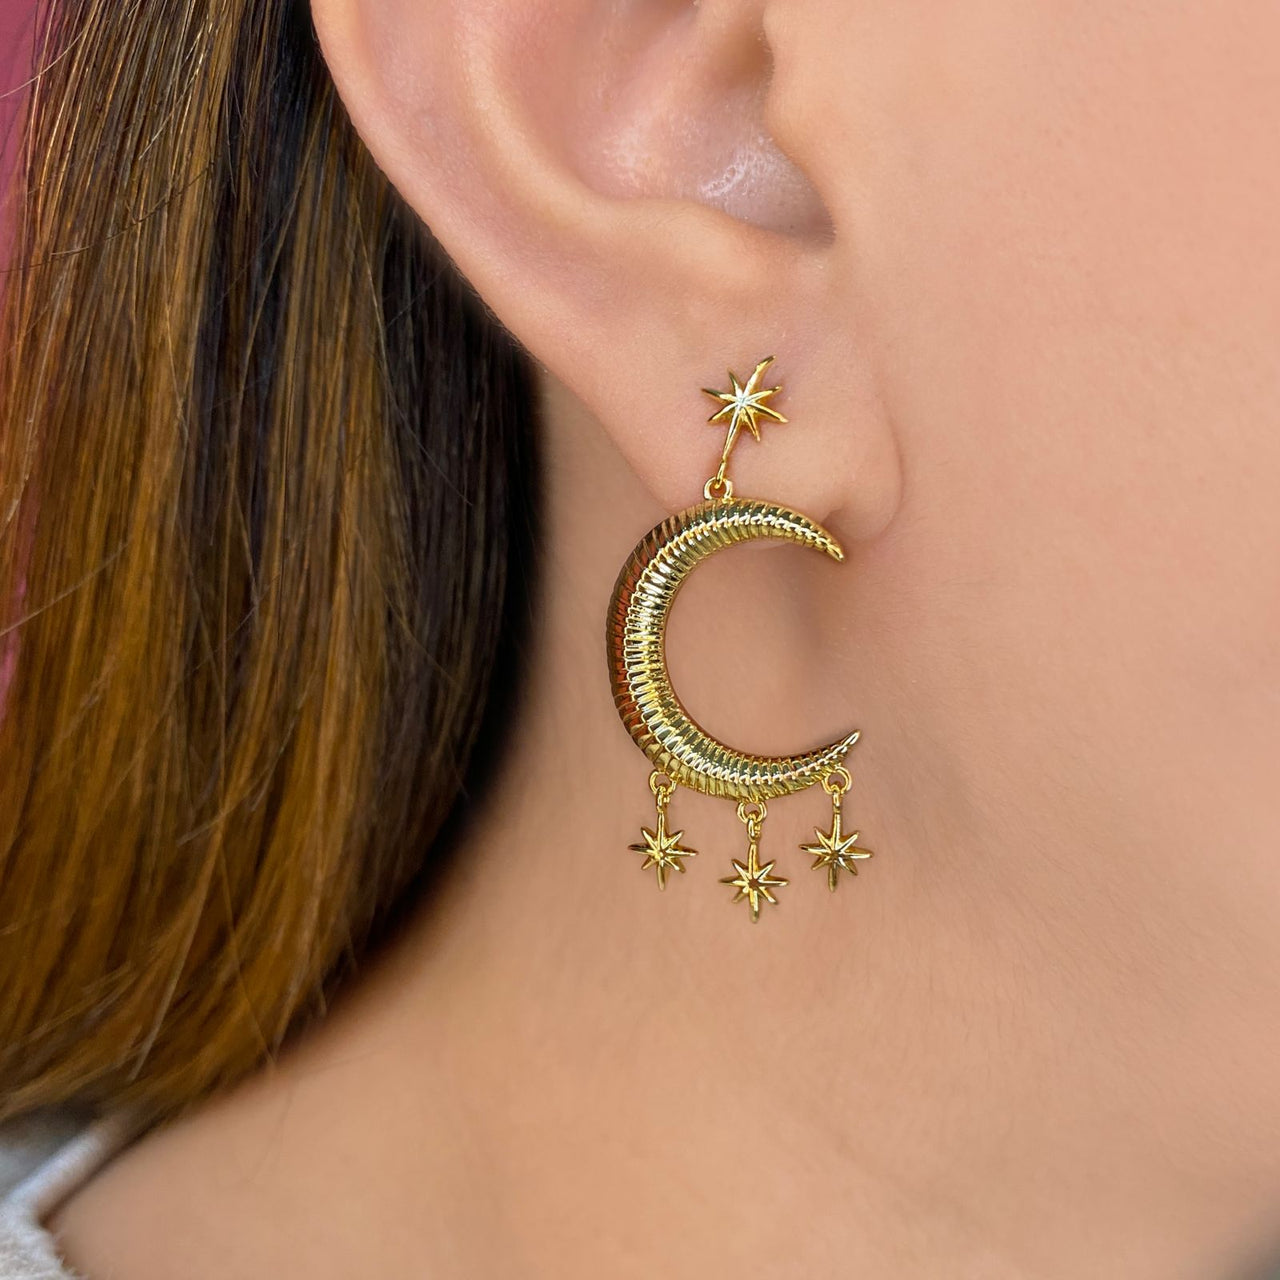 Moon earring with dangling stars (931)